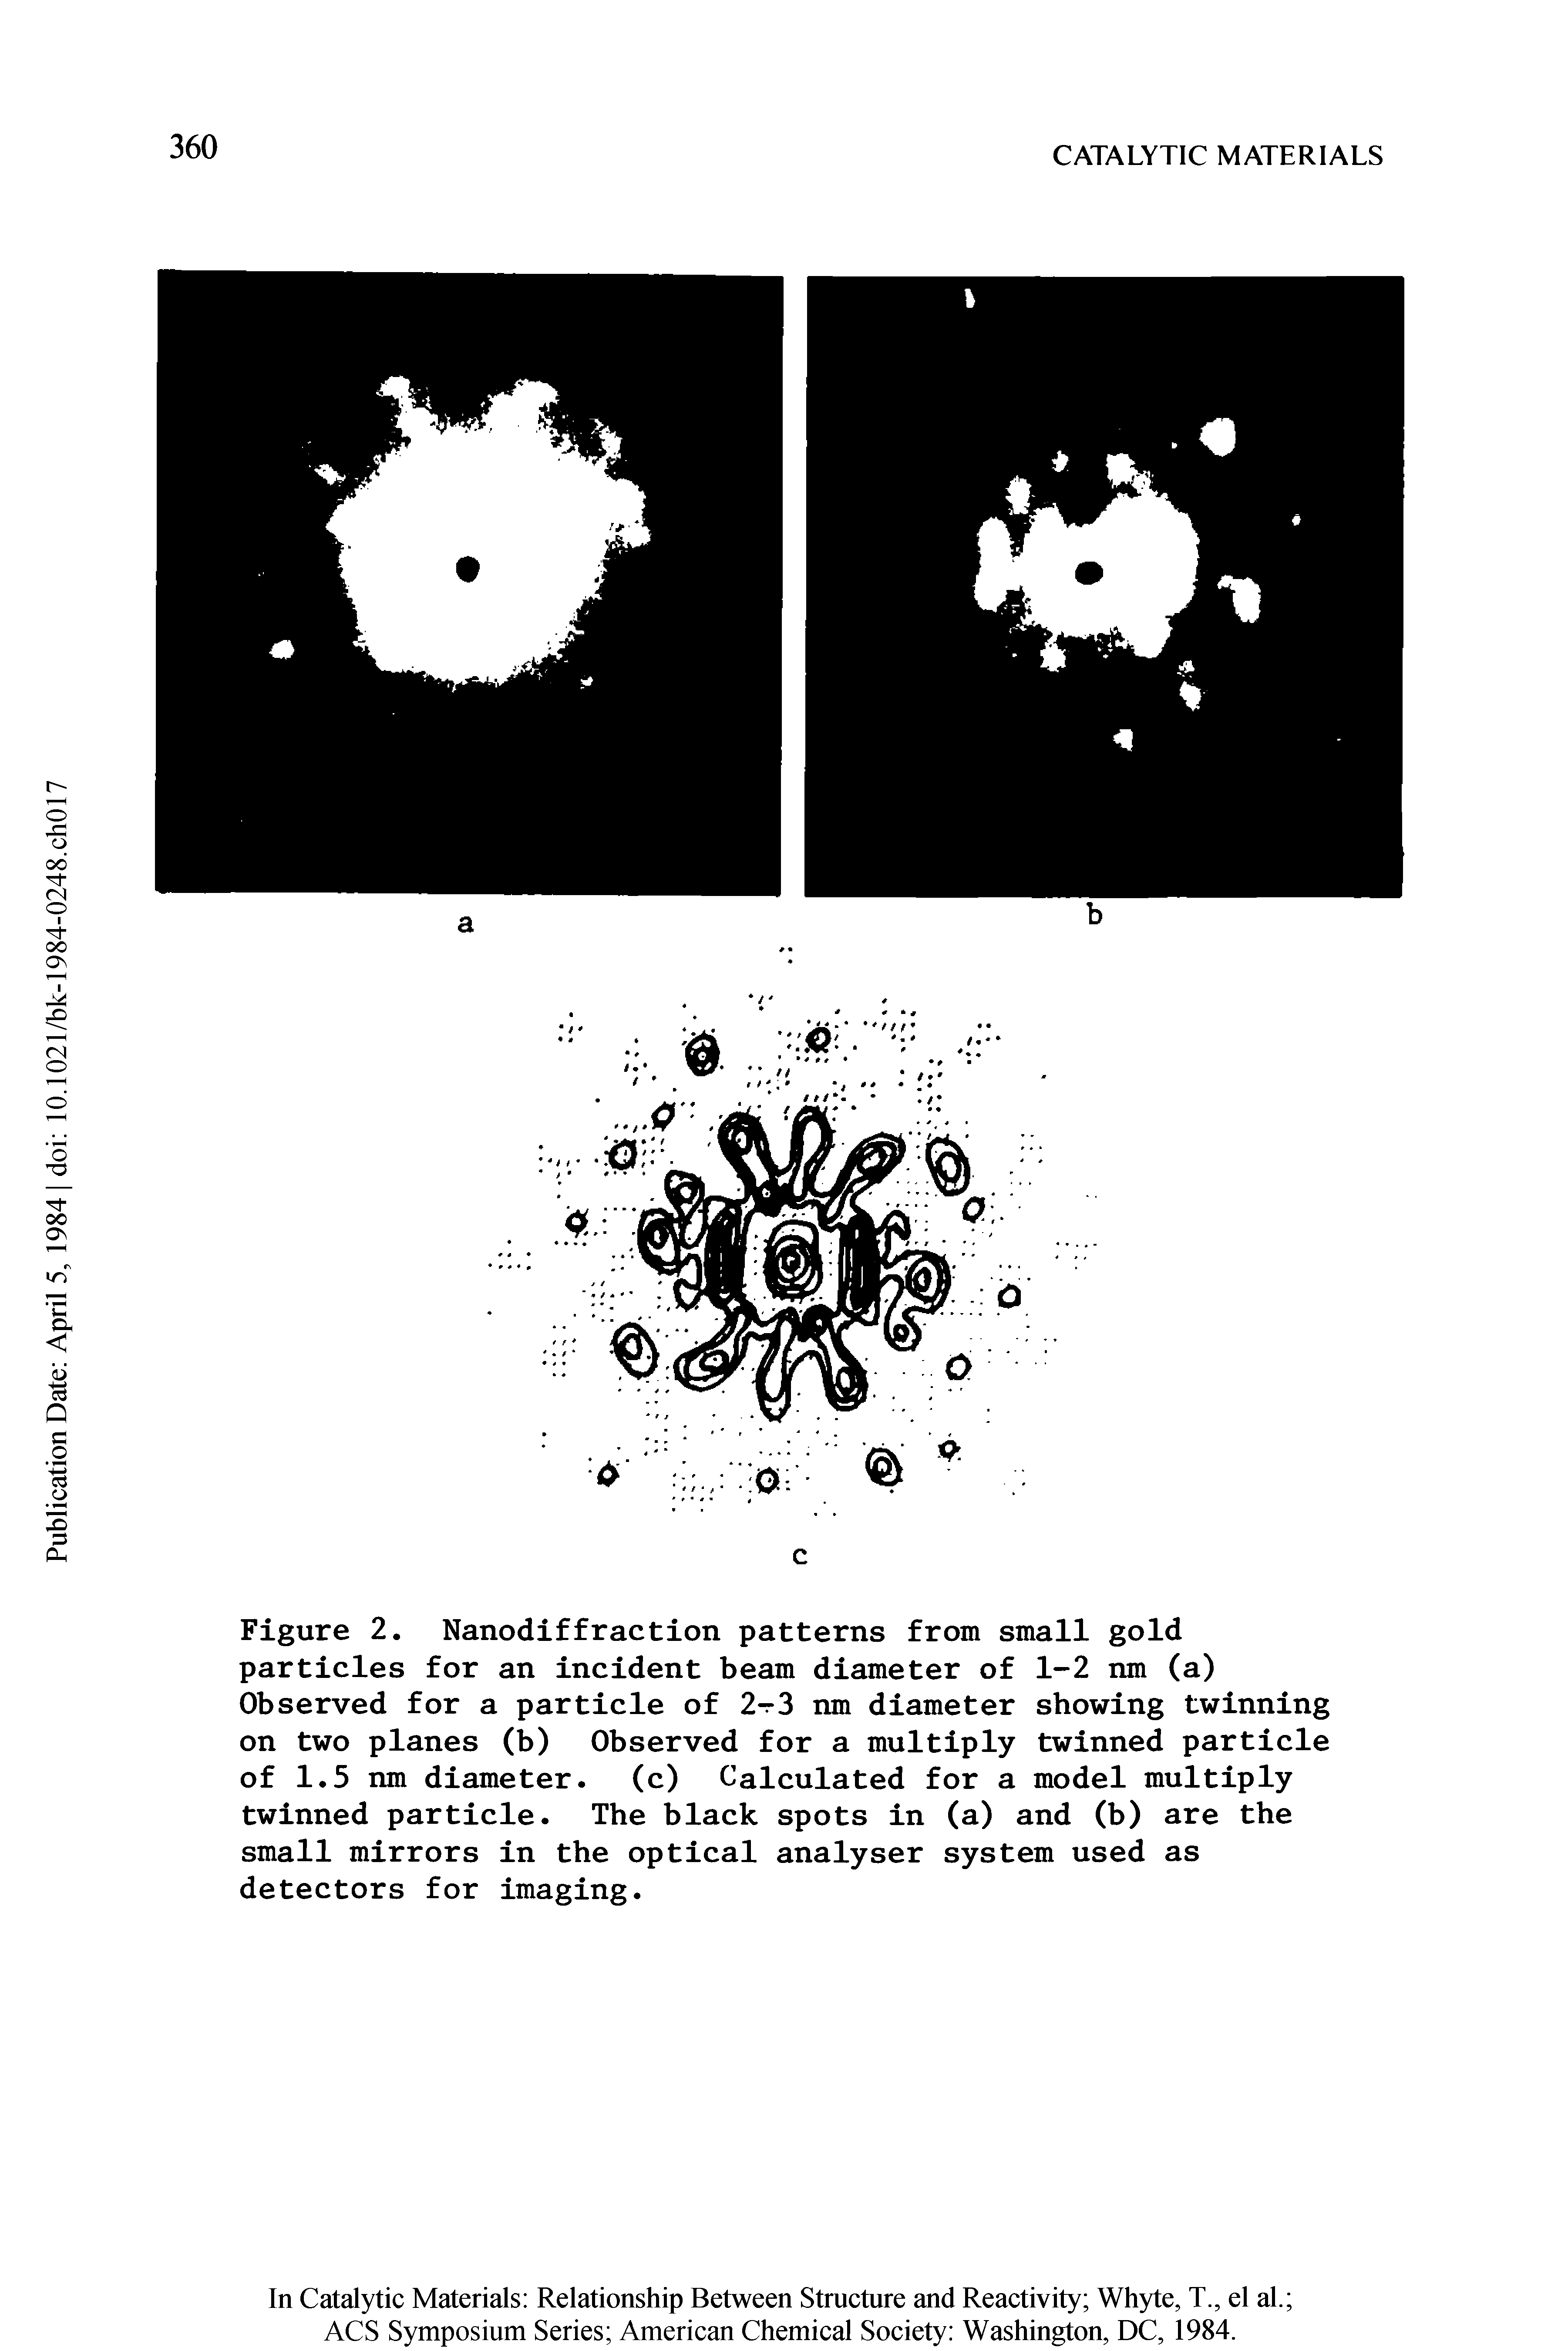 Figure 2. Nanodiffraction patterns from small gold particles for an incident beam diameter of 1-2 nm (a) Observed for a particle of 2-3 nm diameter showing twinning on two planes (b) Observed for a multiply twinned particle of 1.5 nm diameter. (c) Calculated for a model multiply twinned particle. The black spots in (a) and (b) are the small mirrors in the optical analyser system used as detectors for imaging.